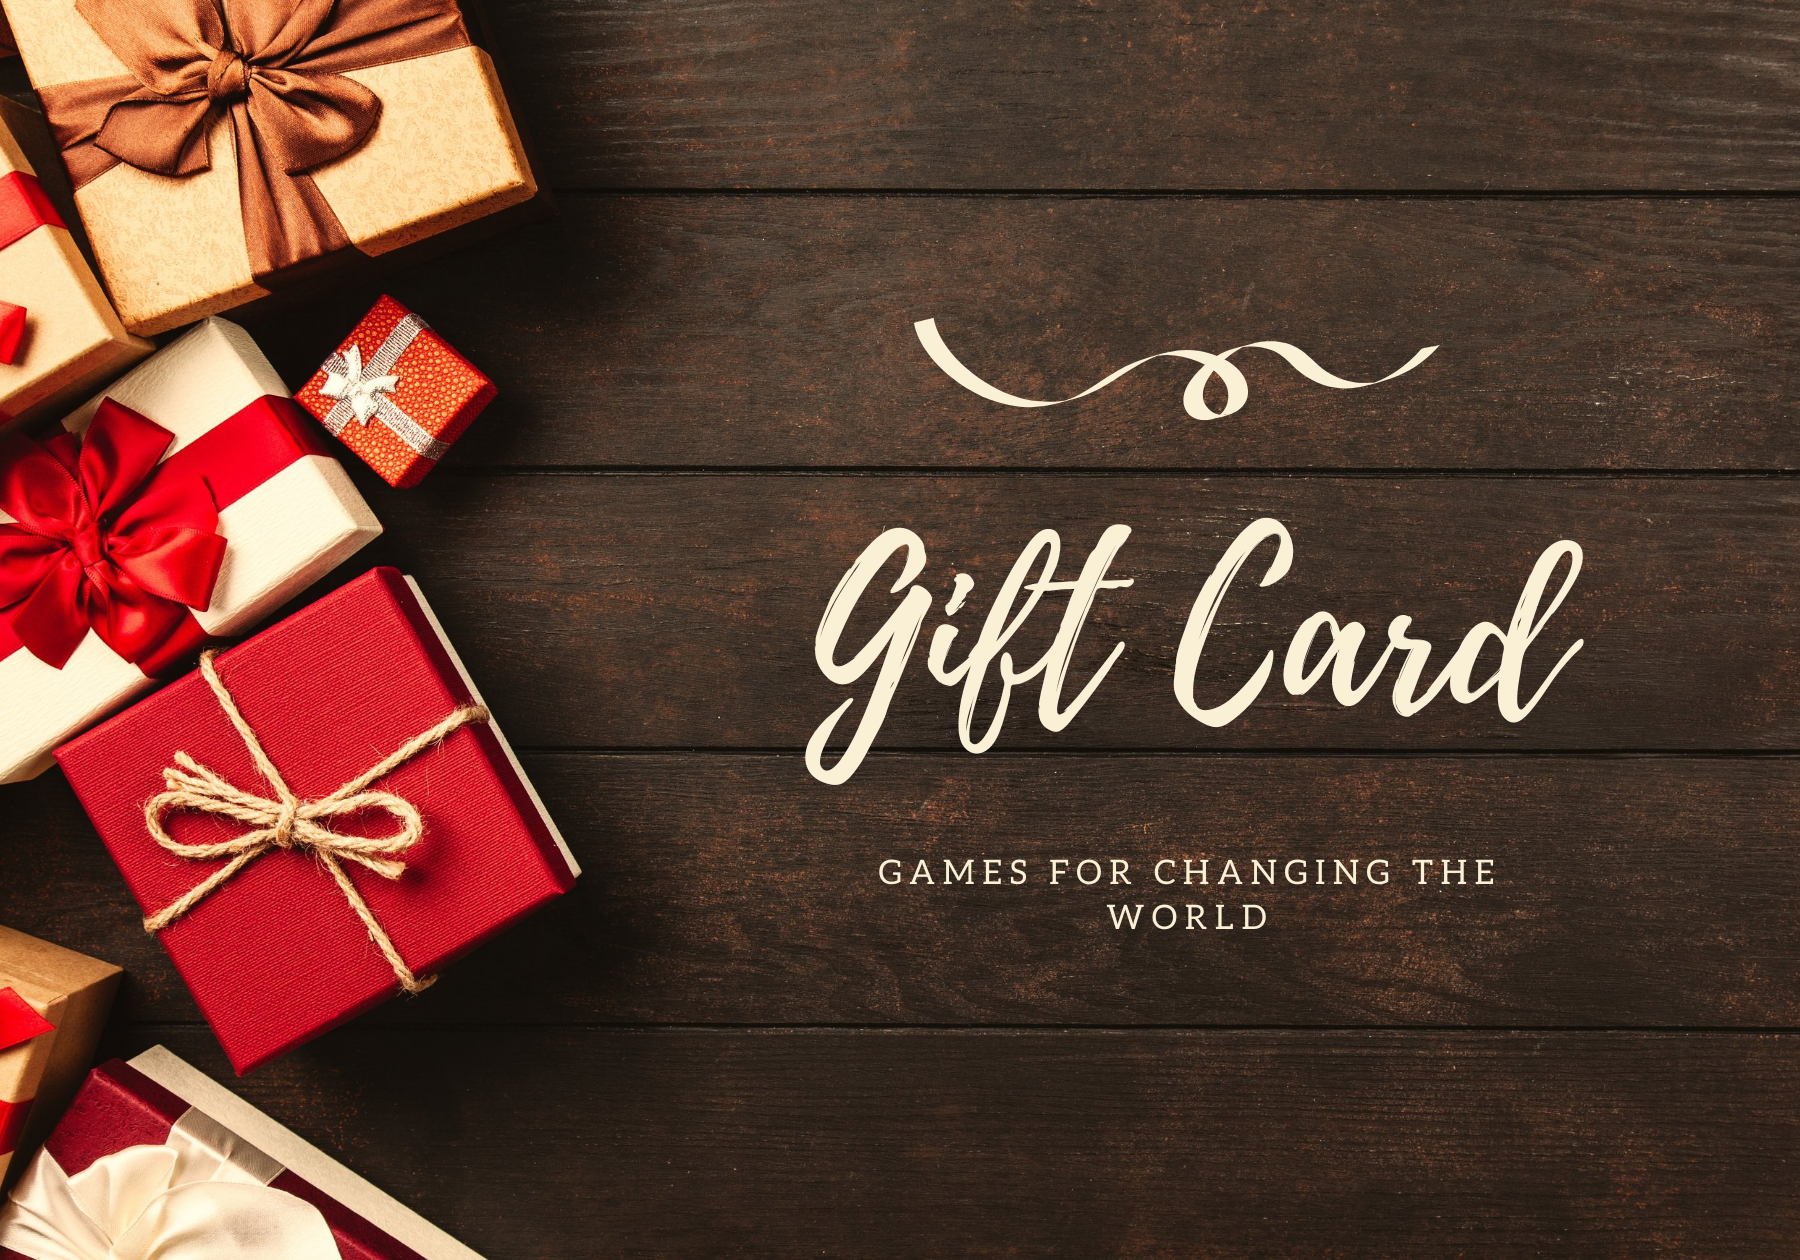 Gift Cards, New Era Games